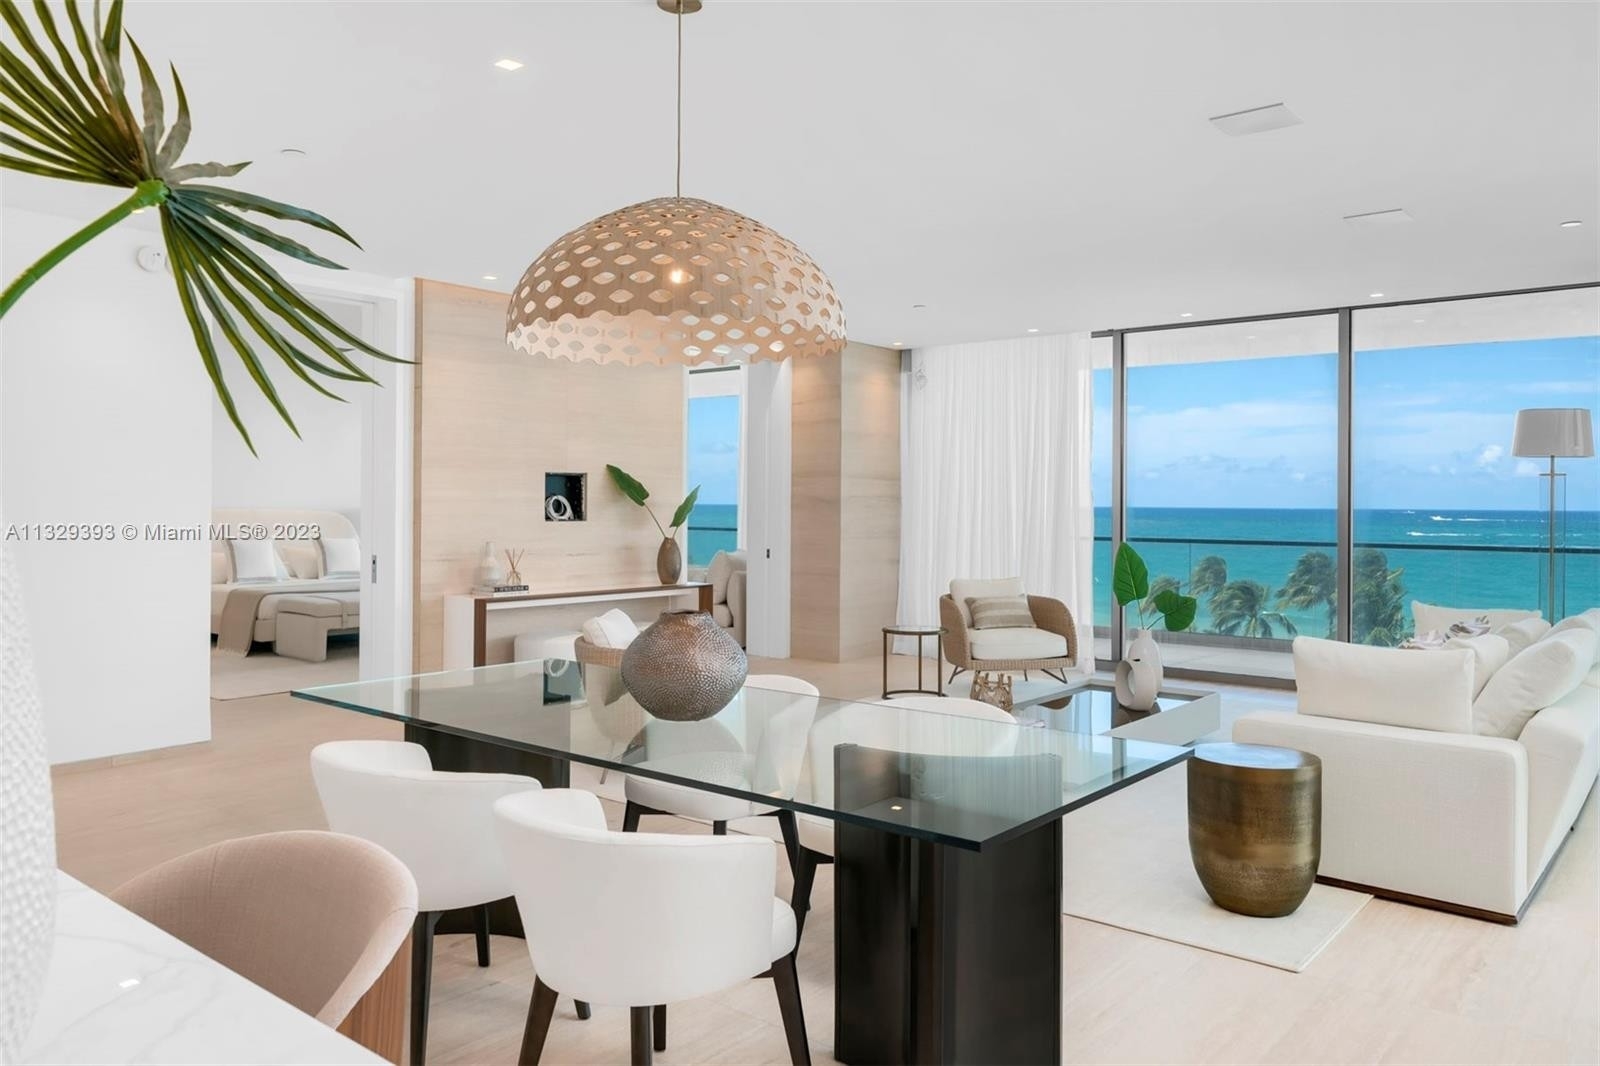 Property at 10201 Collins Ave, 501 Bal Harbour, FL 33154